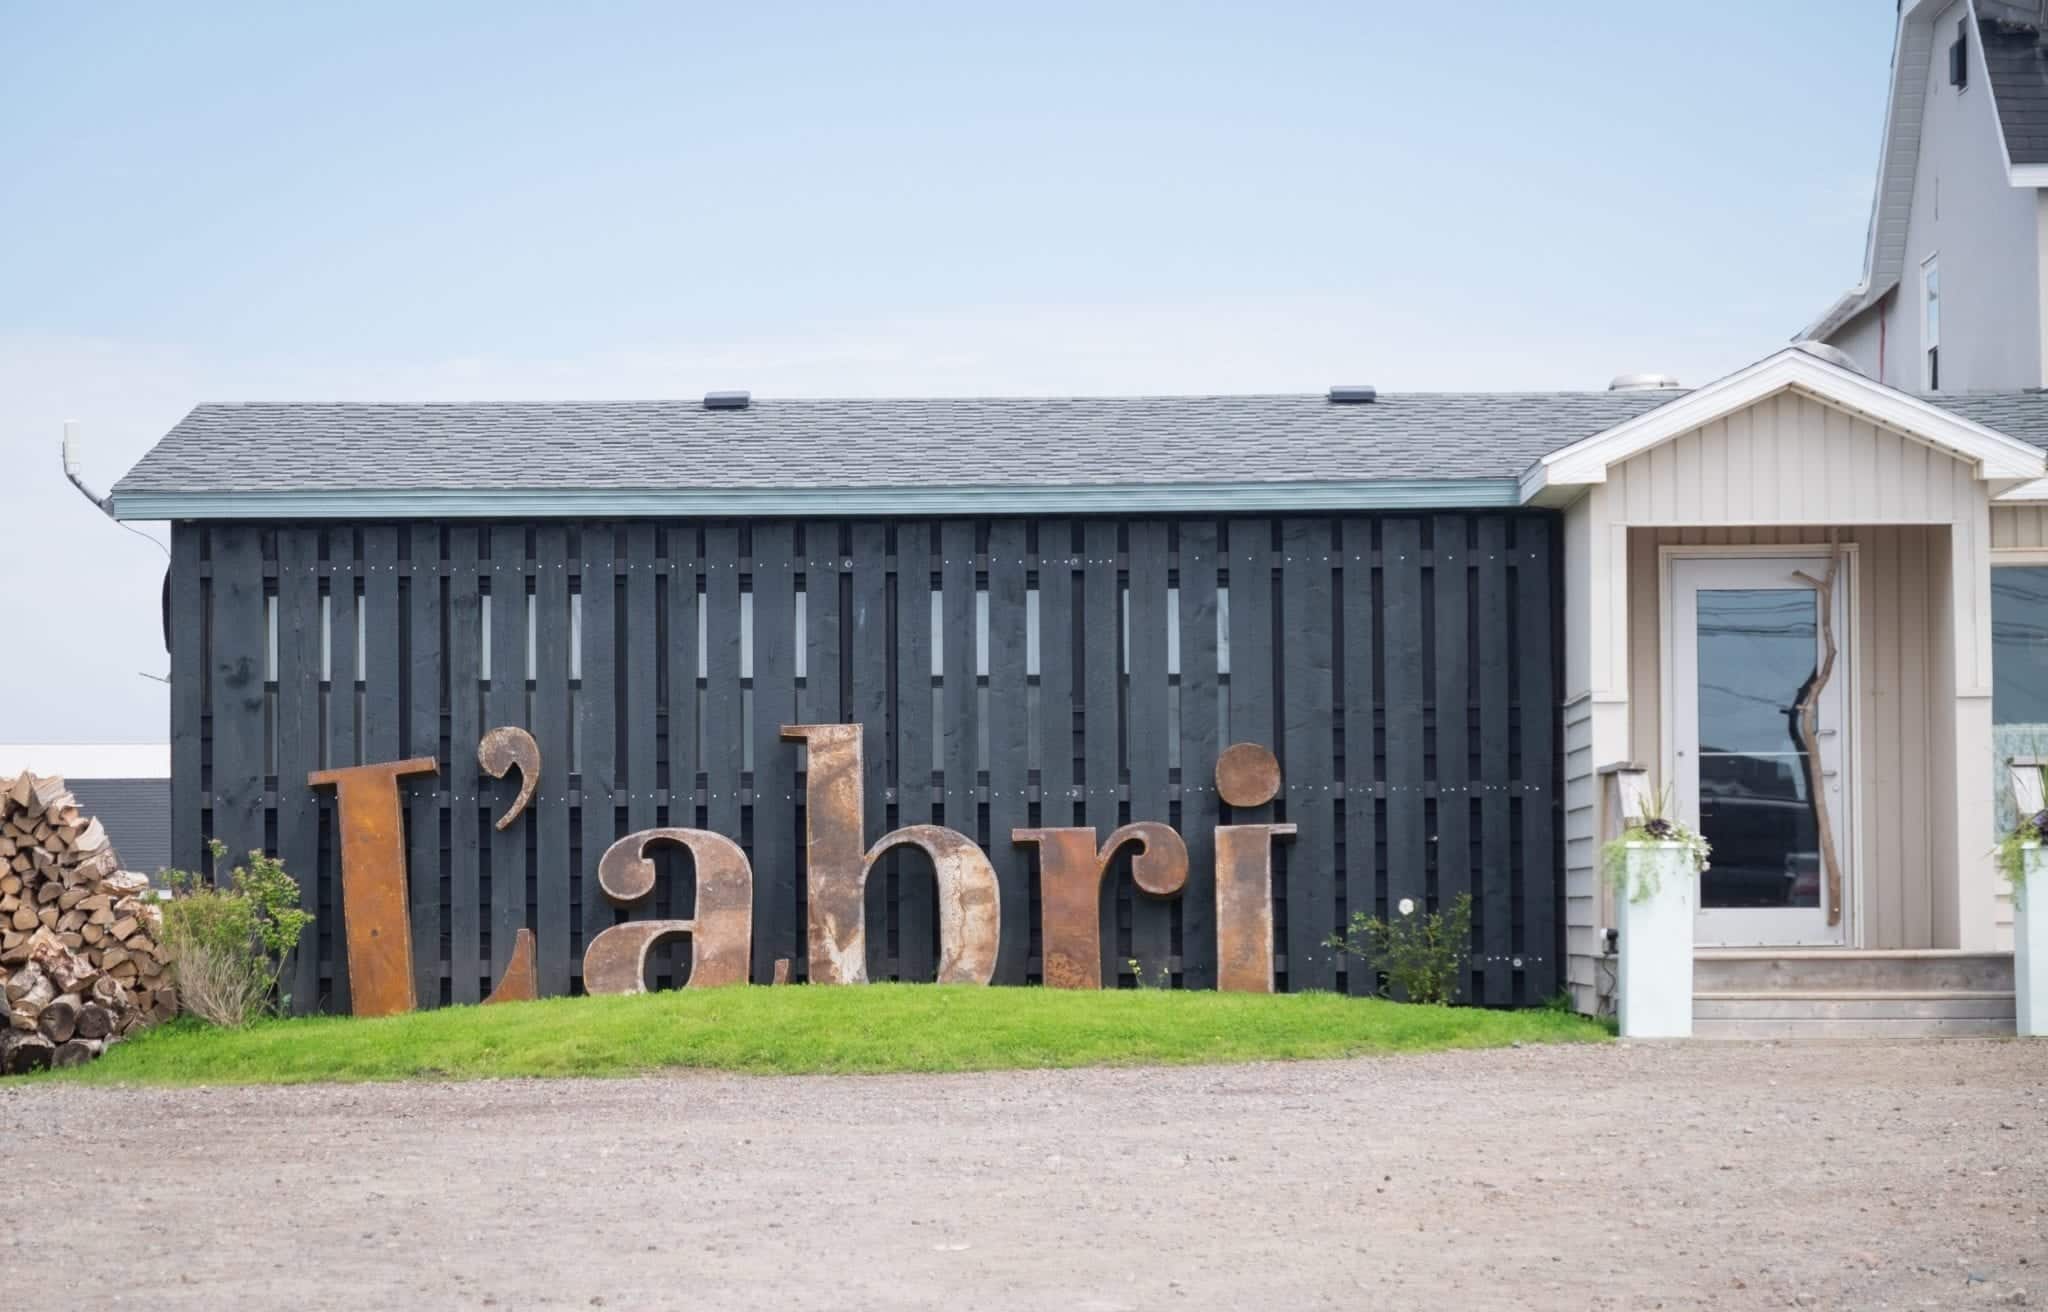 Giant letters reading L'abri in front of a one-story restaurant